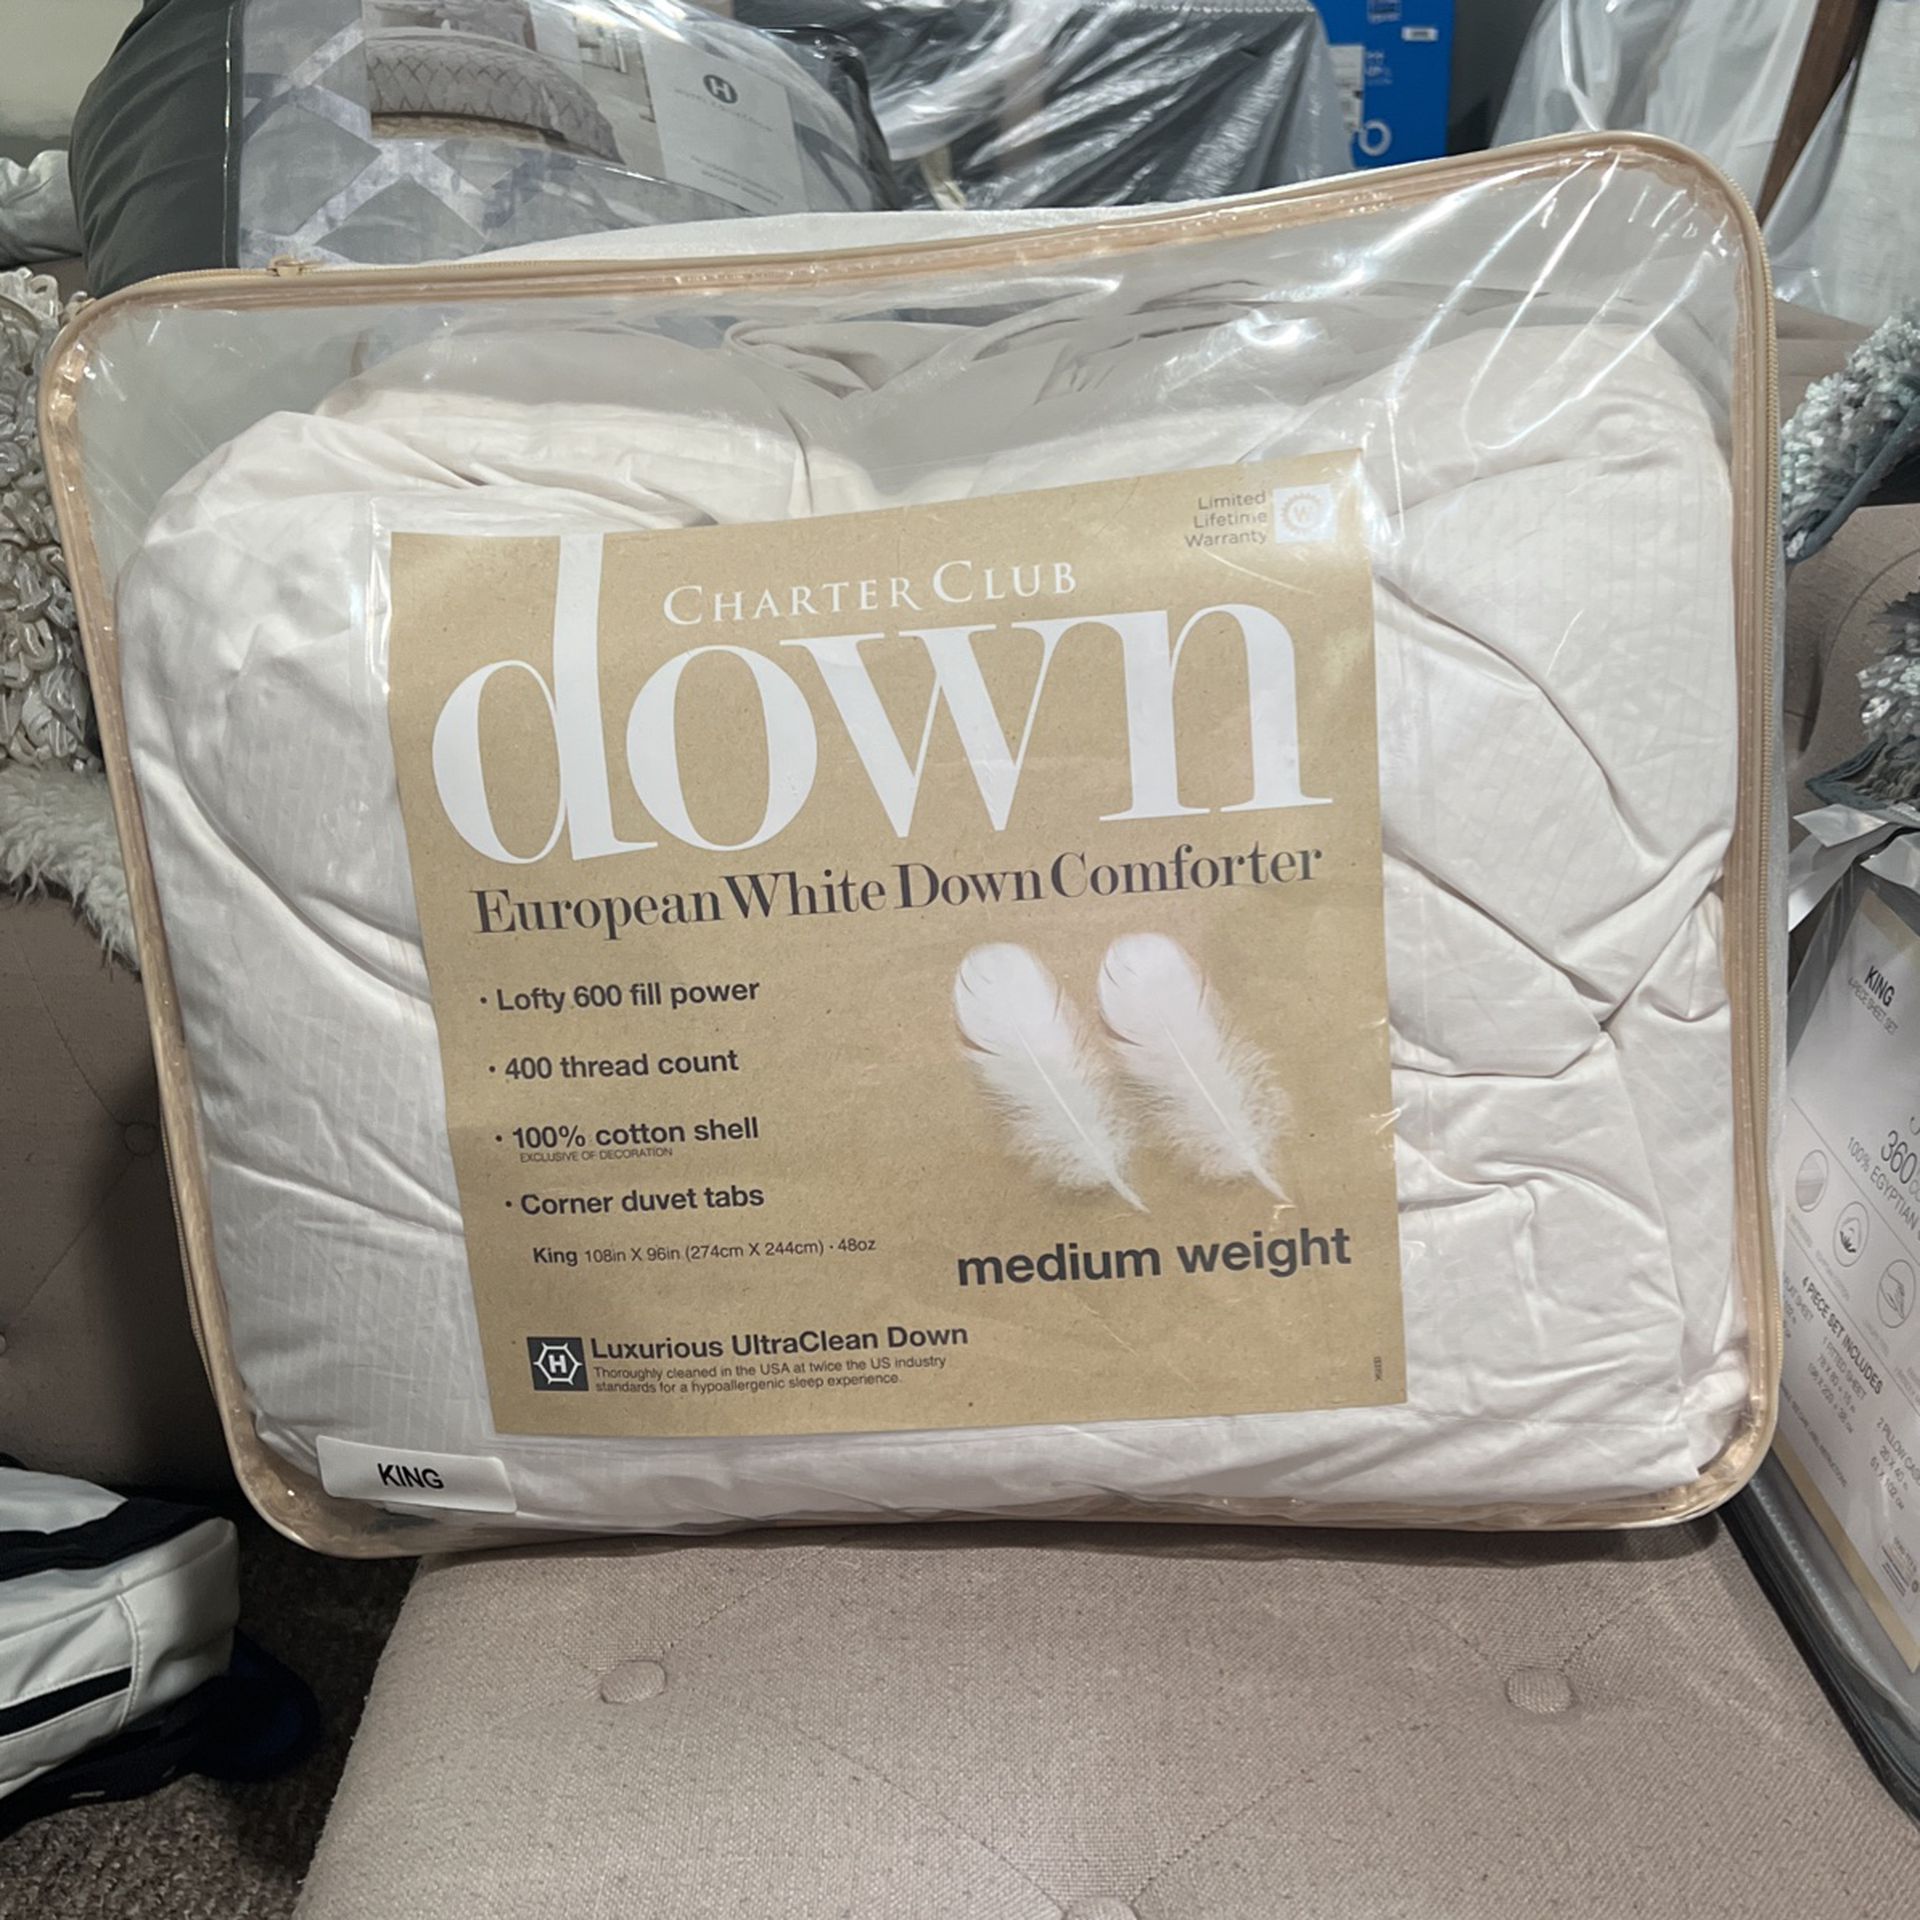 King Size Down Comforter Brand New KING SIZE 400 Thread Count 100% Cotton MEDIUM WEIGHT